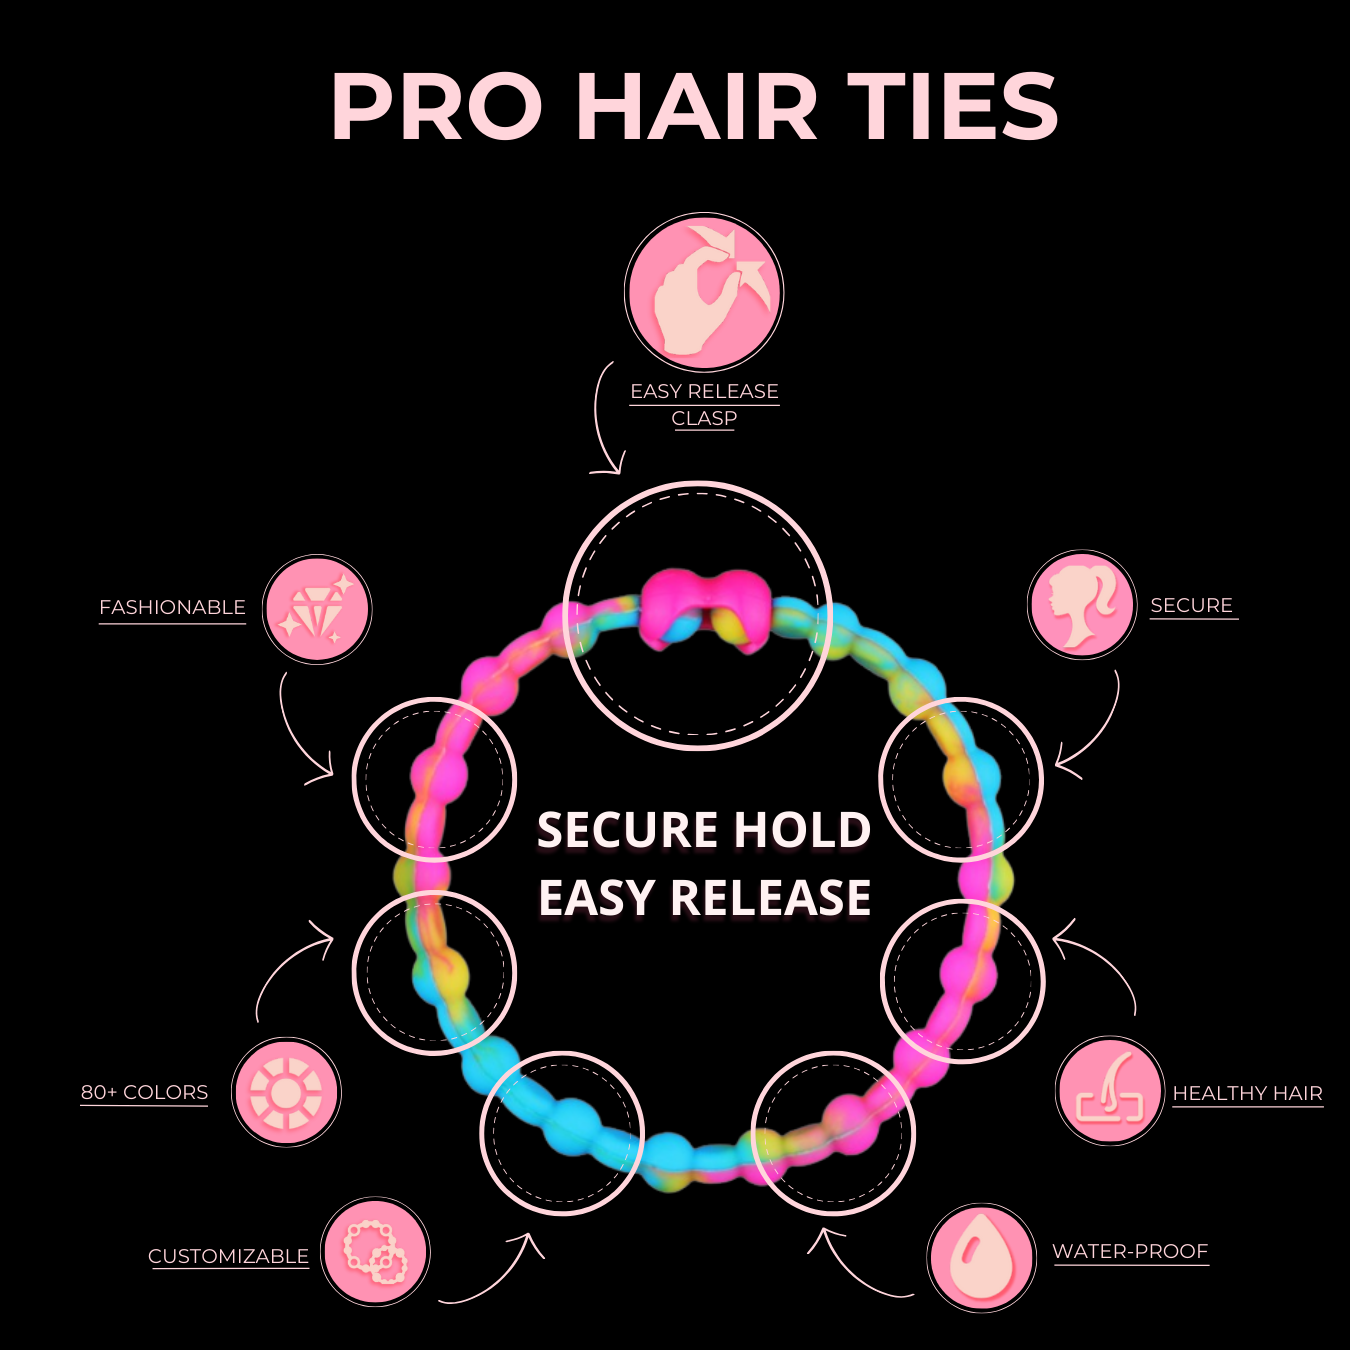 Lunar Glow Pack PRO Hair Ties (4-Pack): Illuminate Your Style with Celestial Hues